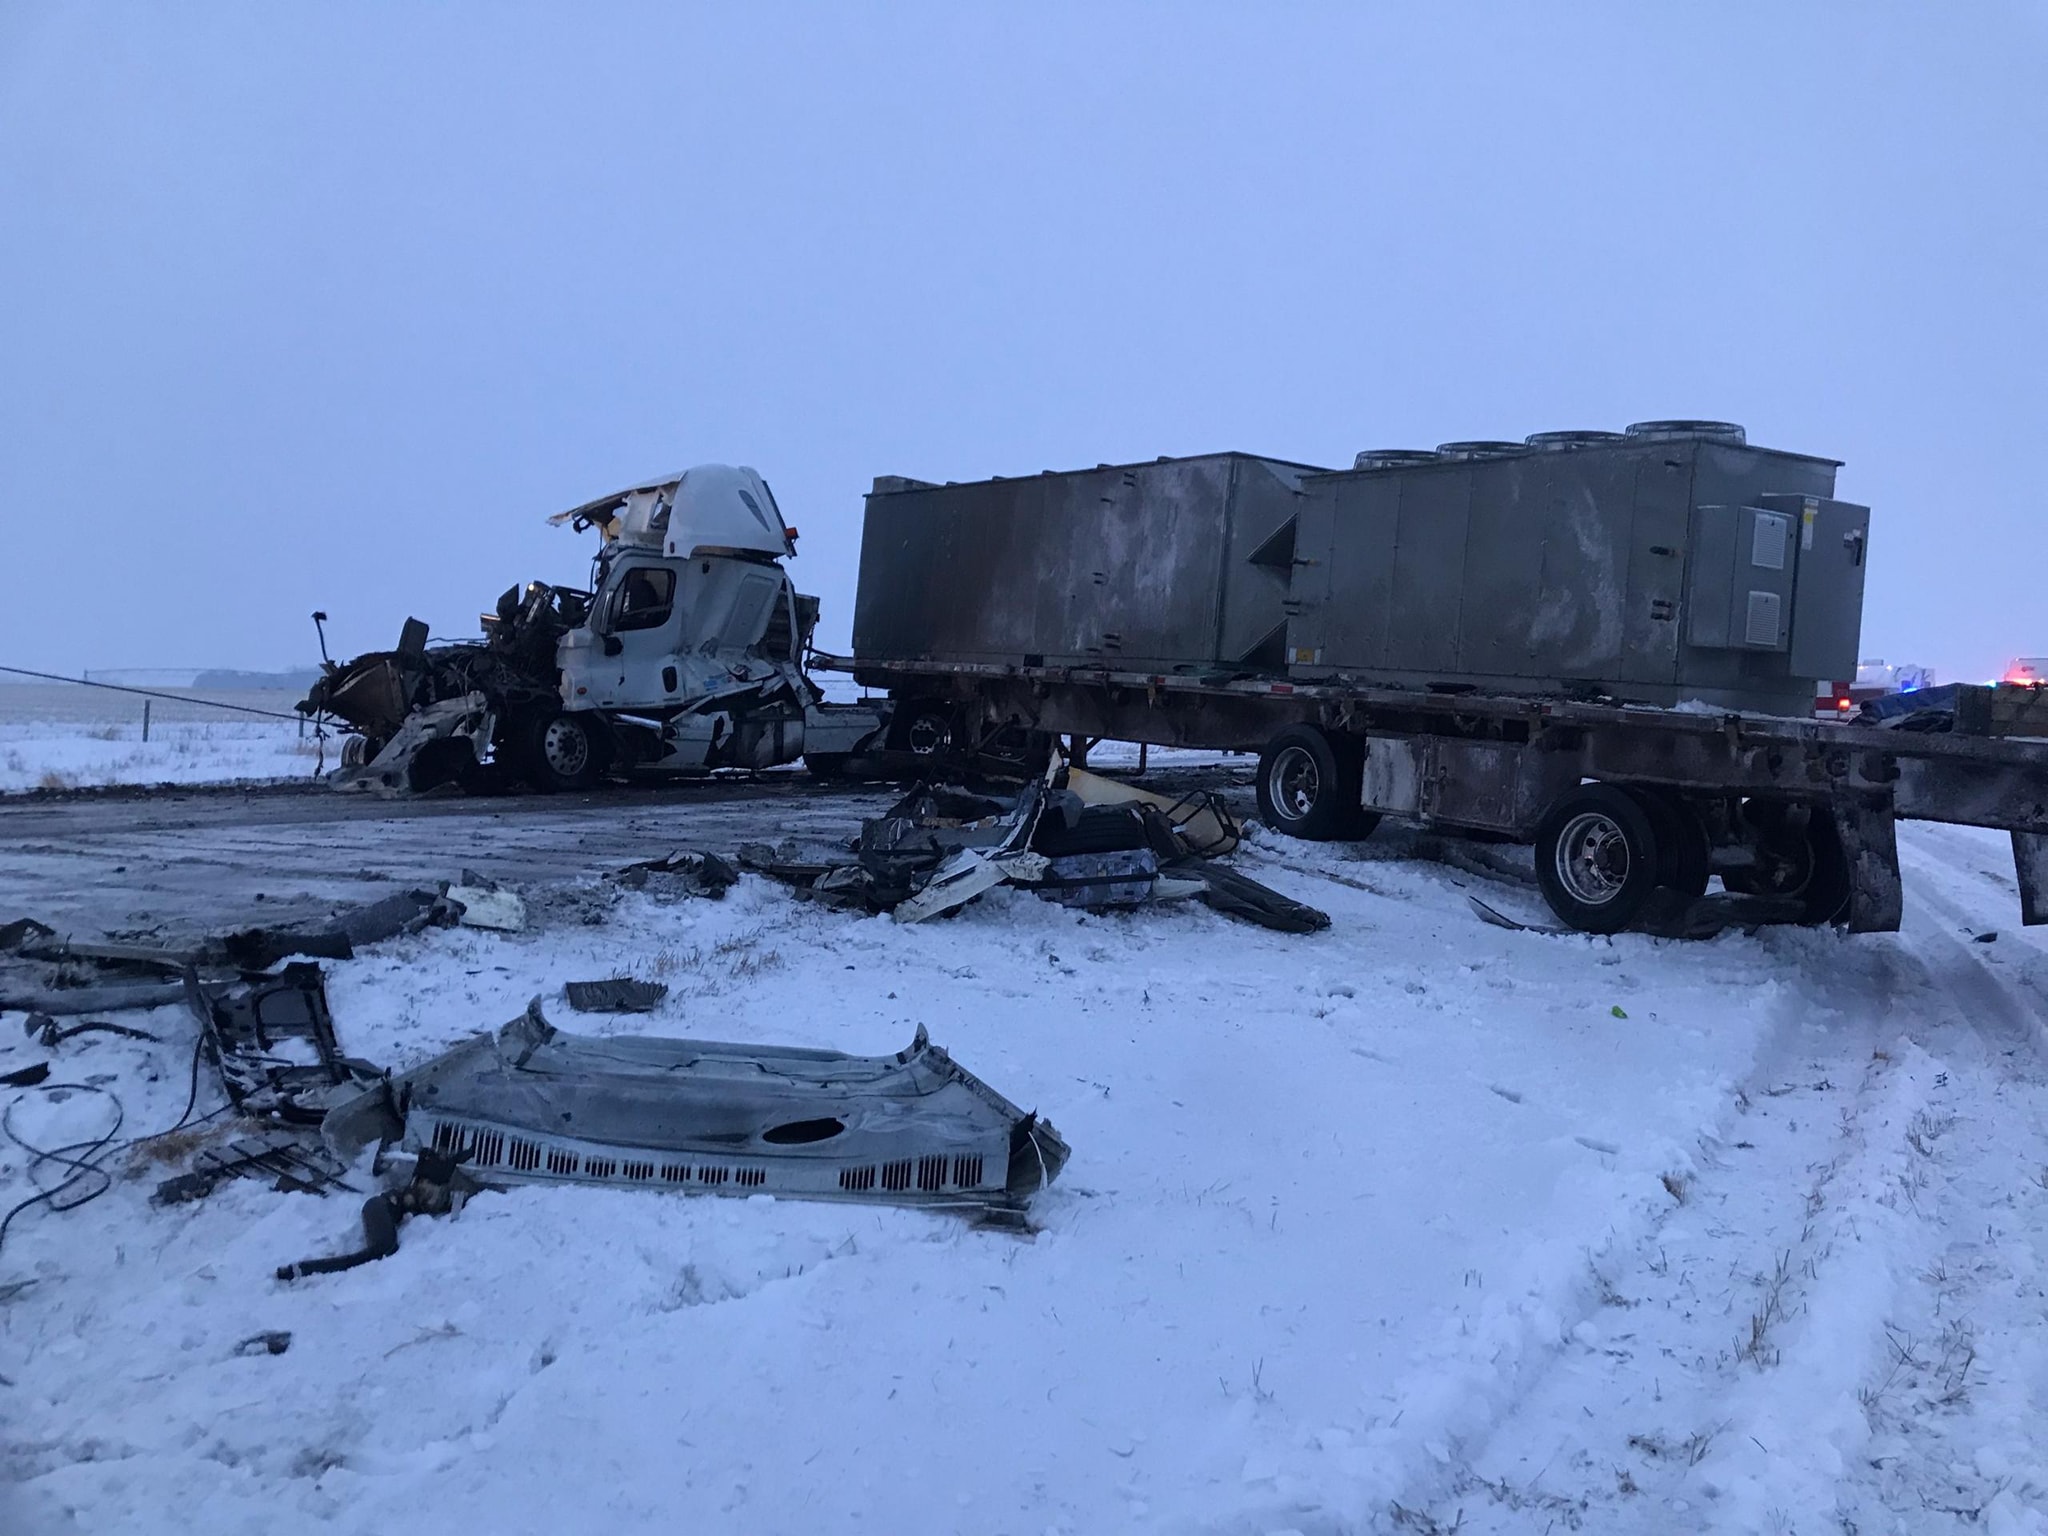 Troopers say no injuries after serious multi-truck crash